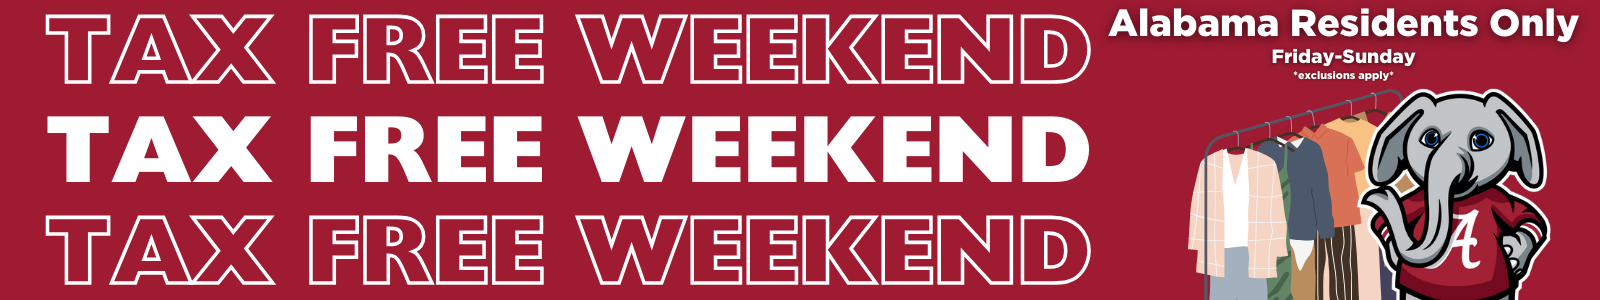 Shop now, It is Tax Free Weekend, Alabama Residents Only Friday through Sunday, exclusions apply- Click Here!